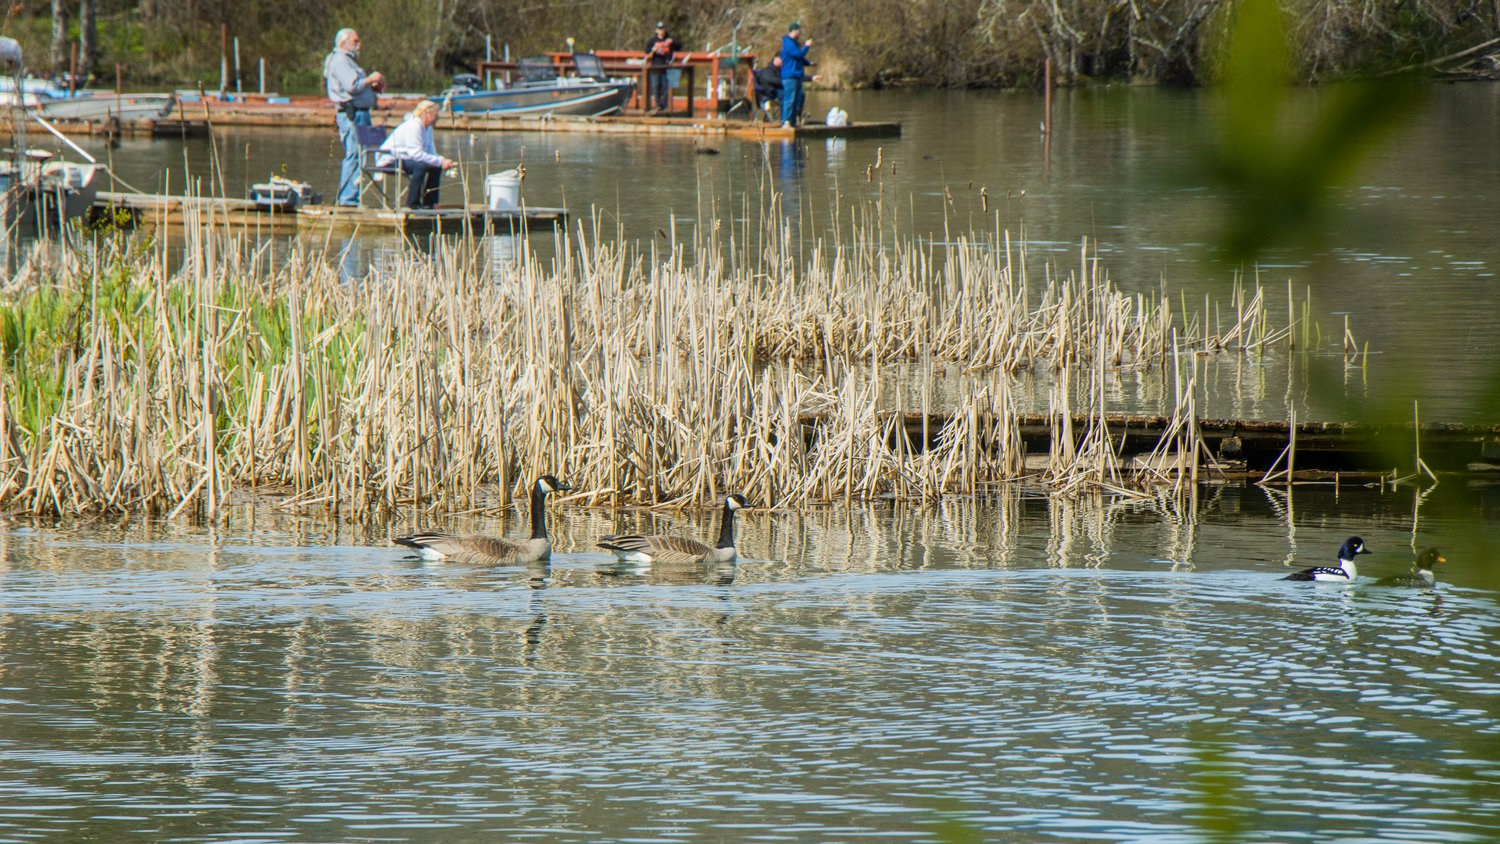 Birds float as campers fish off docks at the Lions Den Campground in Mineral on Saturday.